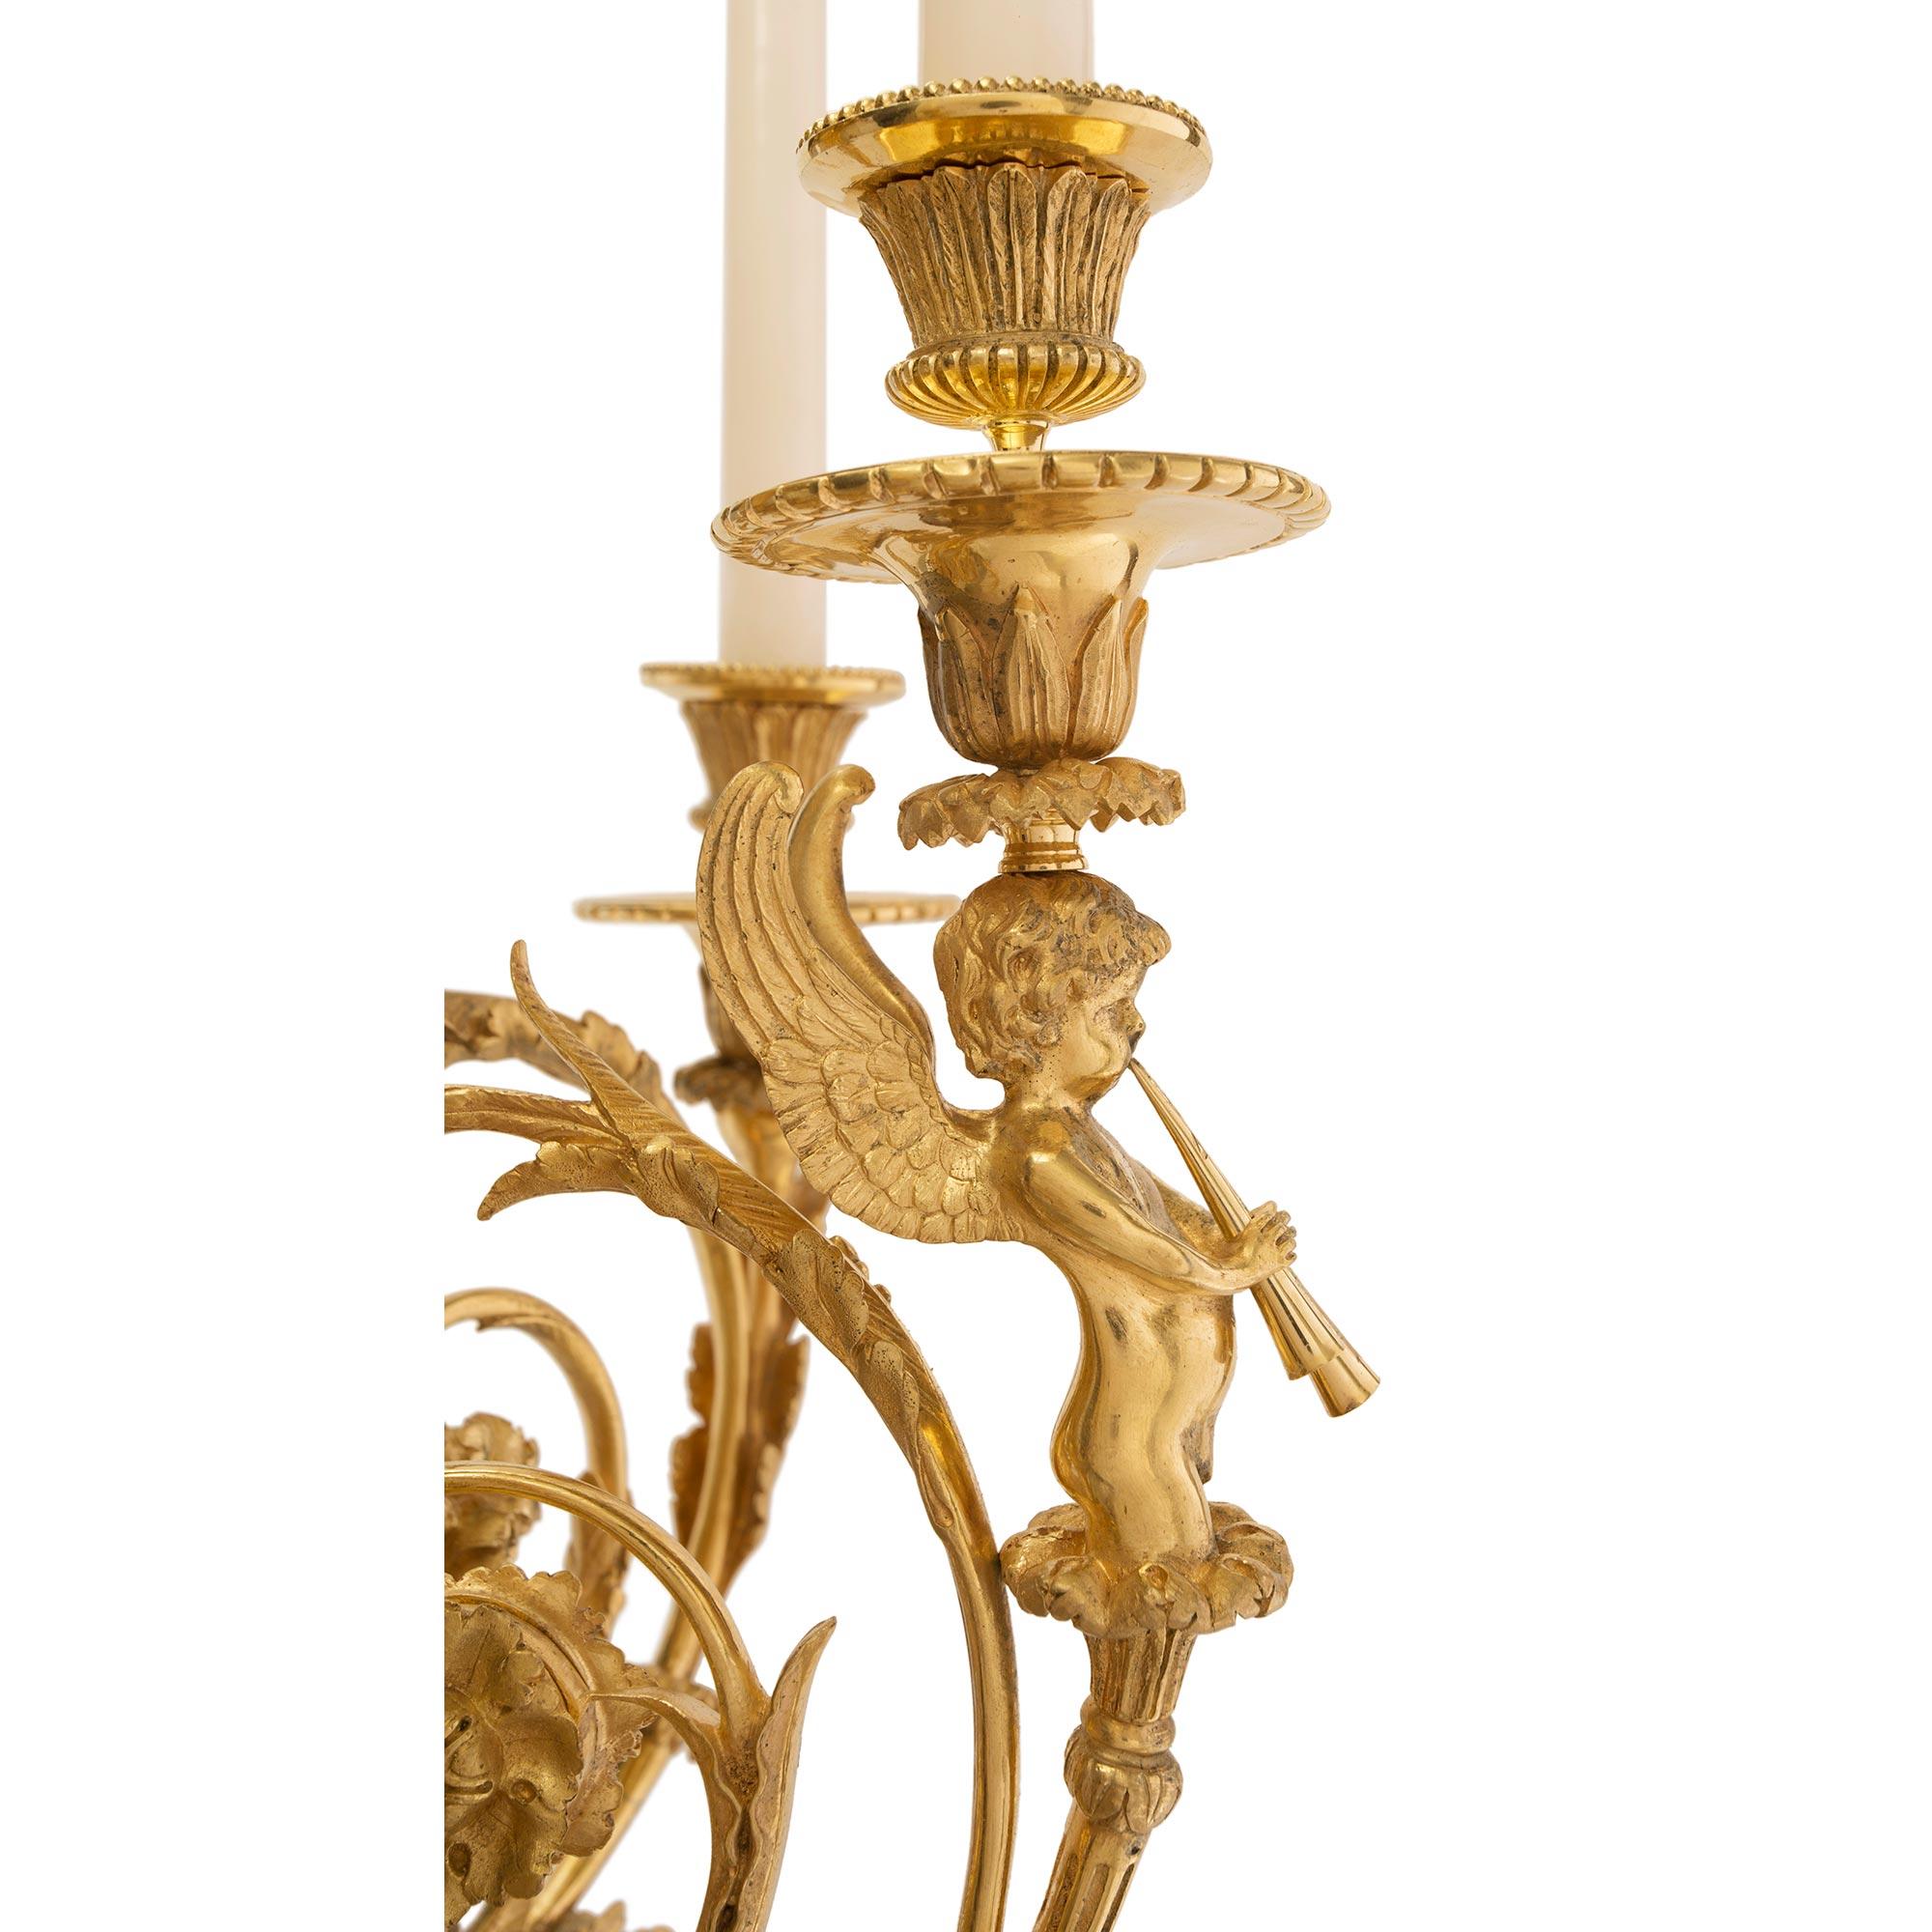 Pair of French Mid-19th Century Louis XVI Style Ormolu, Possibly by Henry Dasson 4